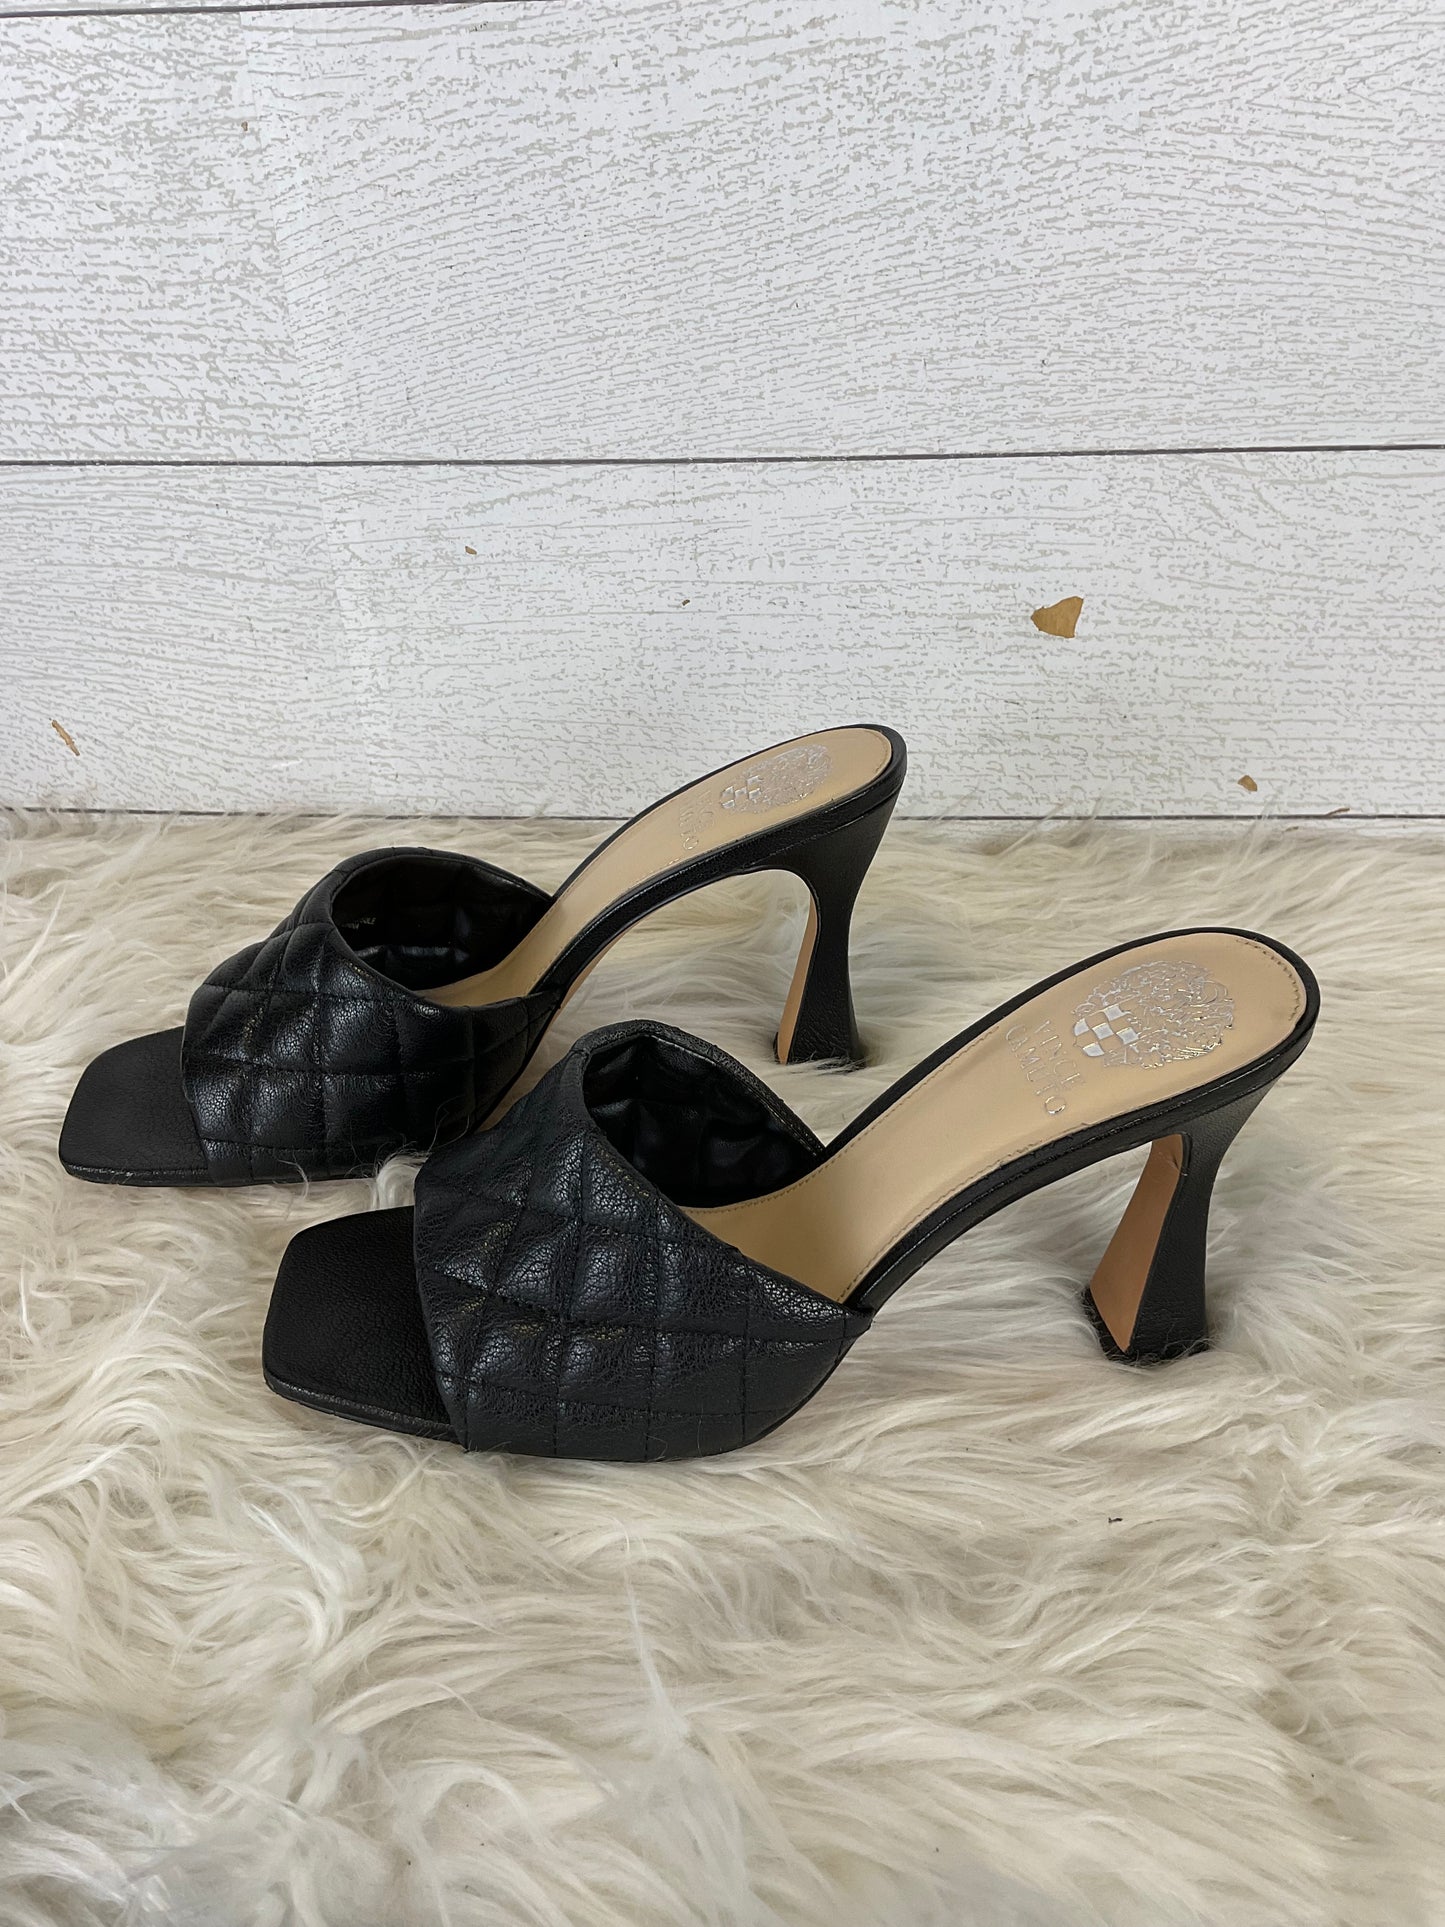 Shoes Heels Stiletto By Vince Camuto  Size: 9.5